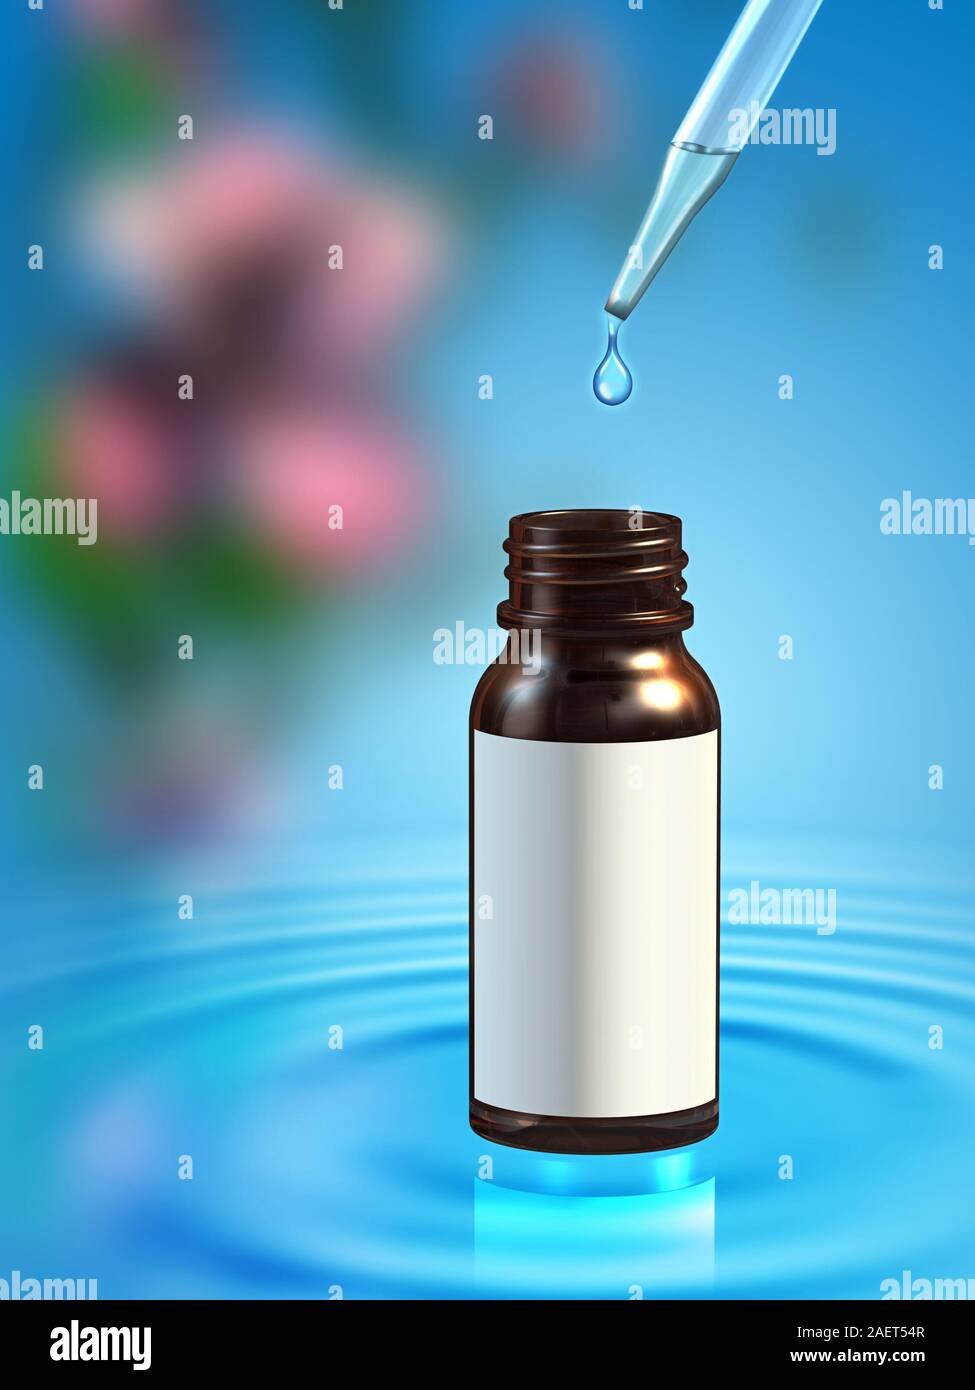 Essential oil bottle on a background with some water ripples and flowers. Digital illustration, included clipping path allows you to put your own labe Stock Photo